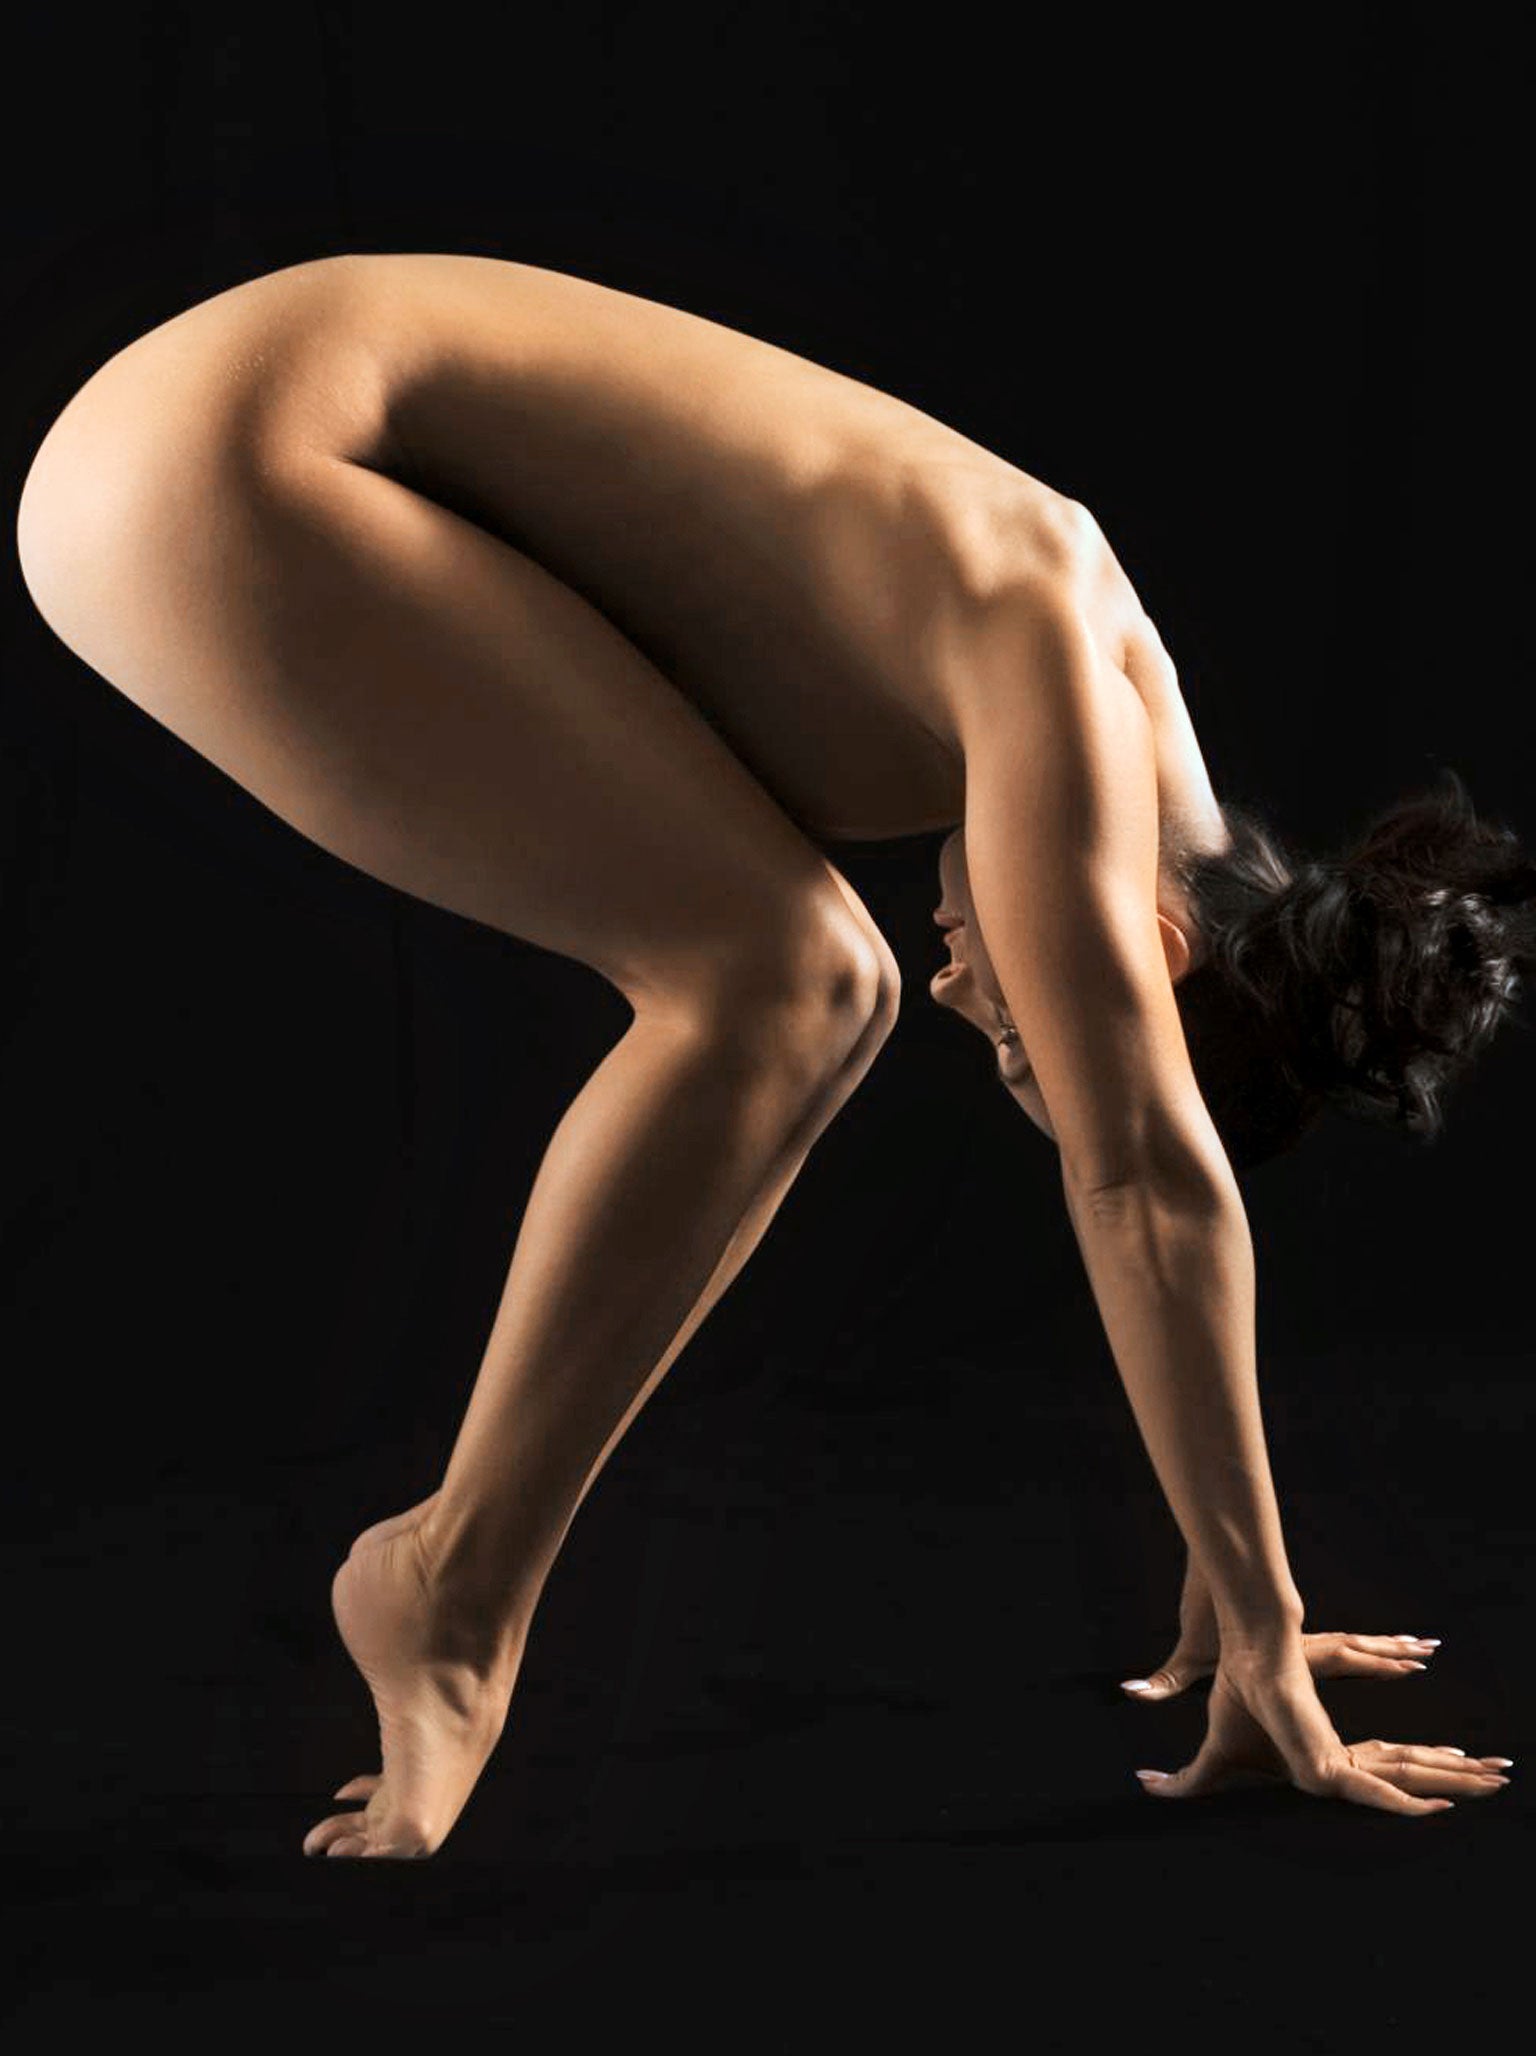 Back to nature: women with body issues have found naked yoga sessions therapeutic